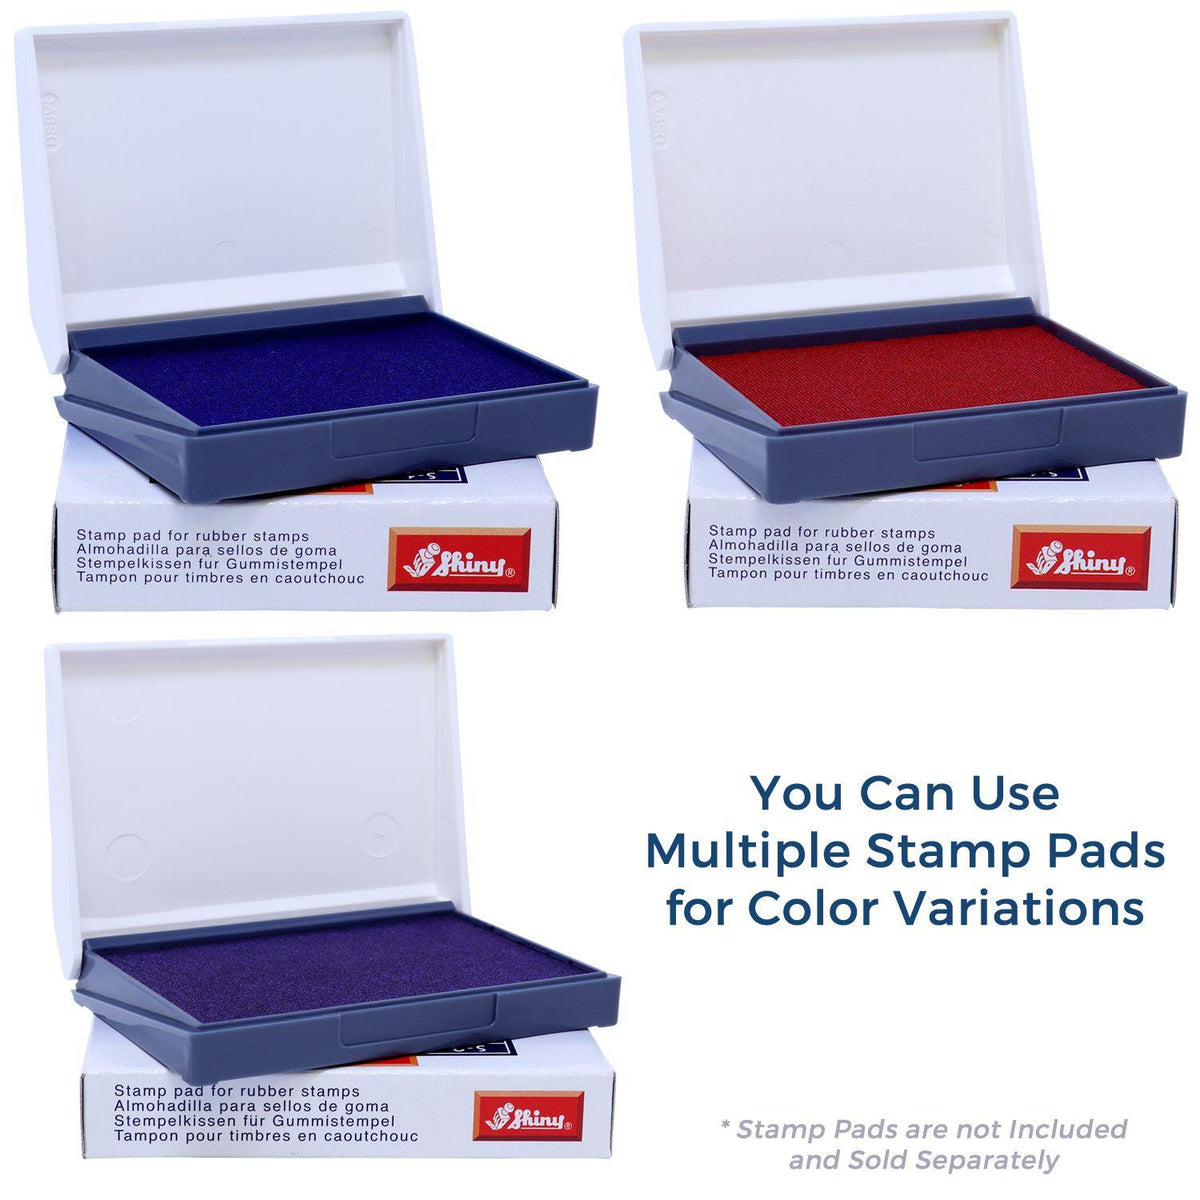 Stamp Pads for Faxed with Machine Rubber Stamp Available